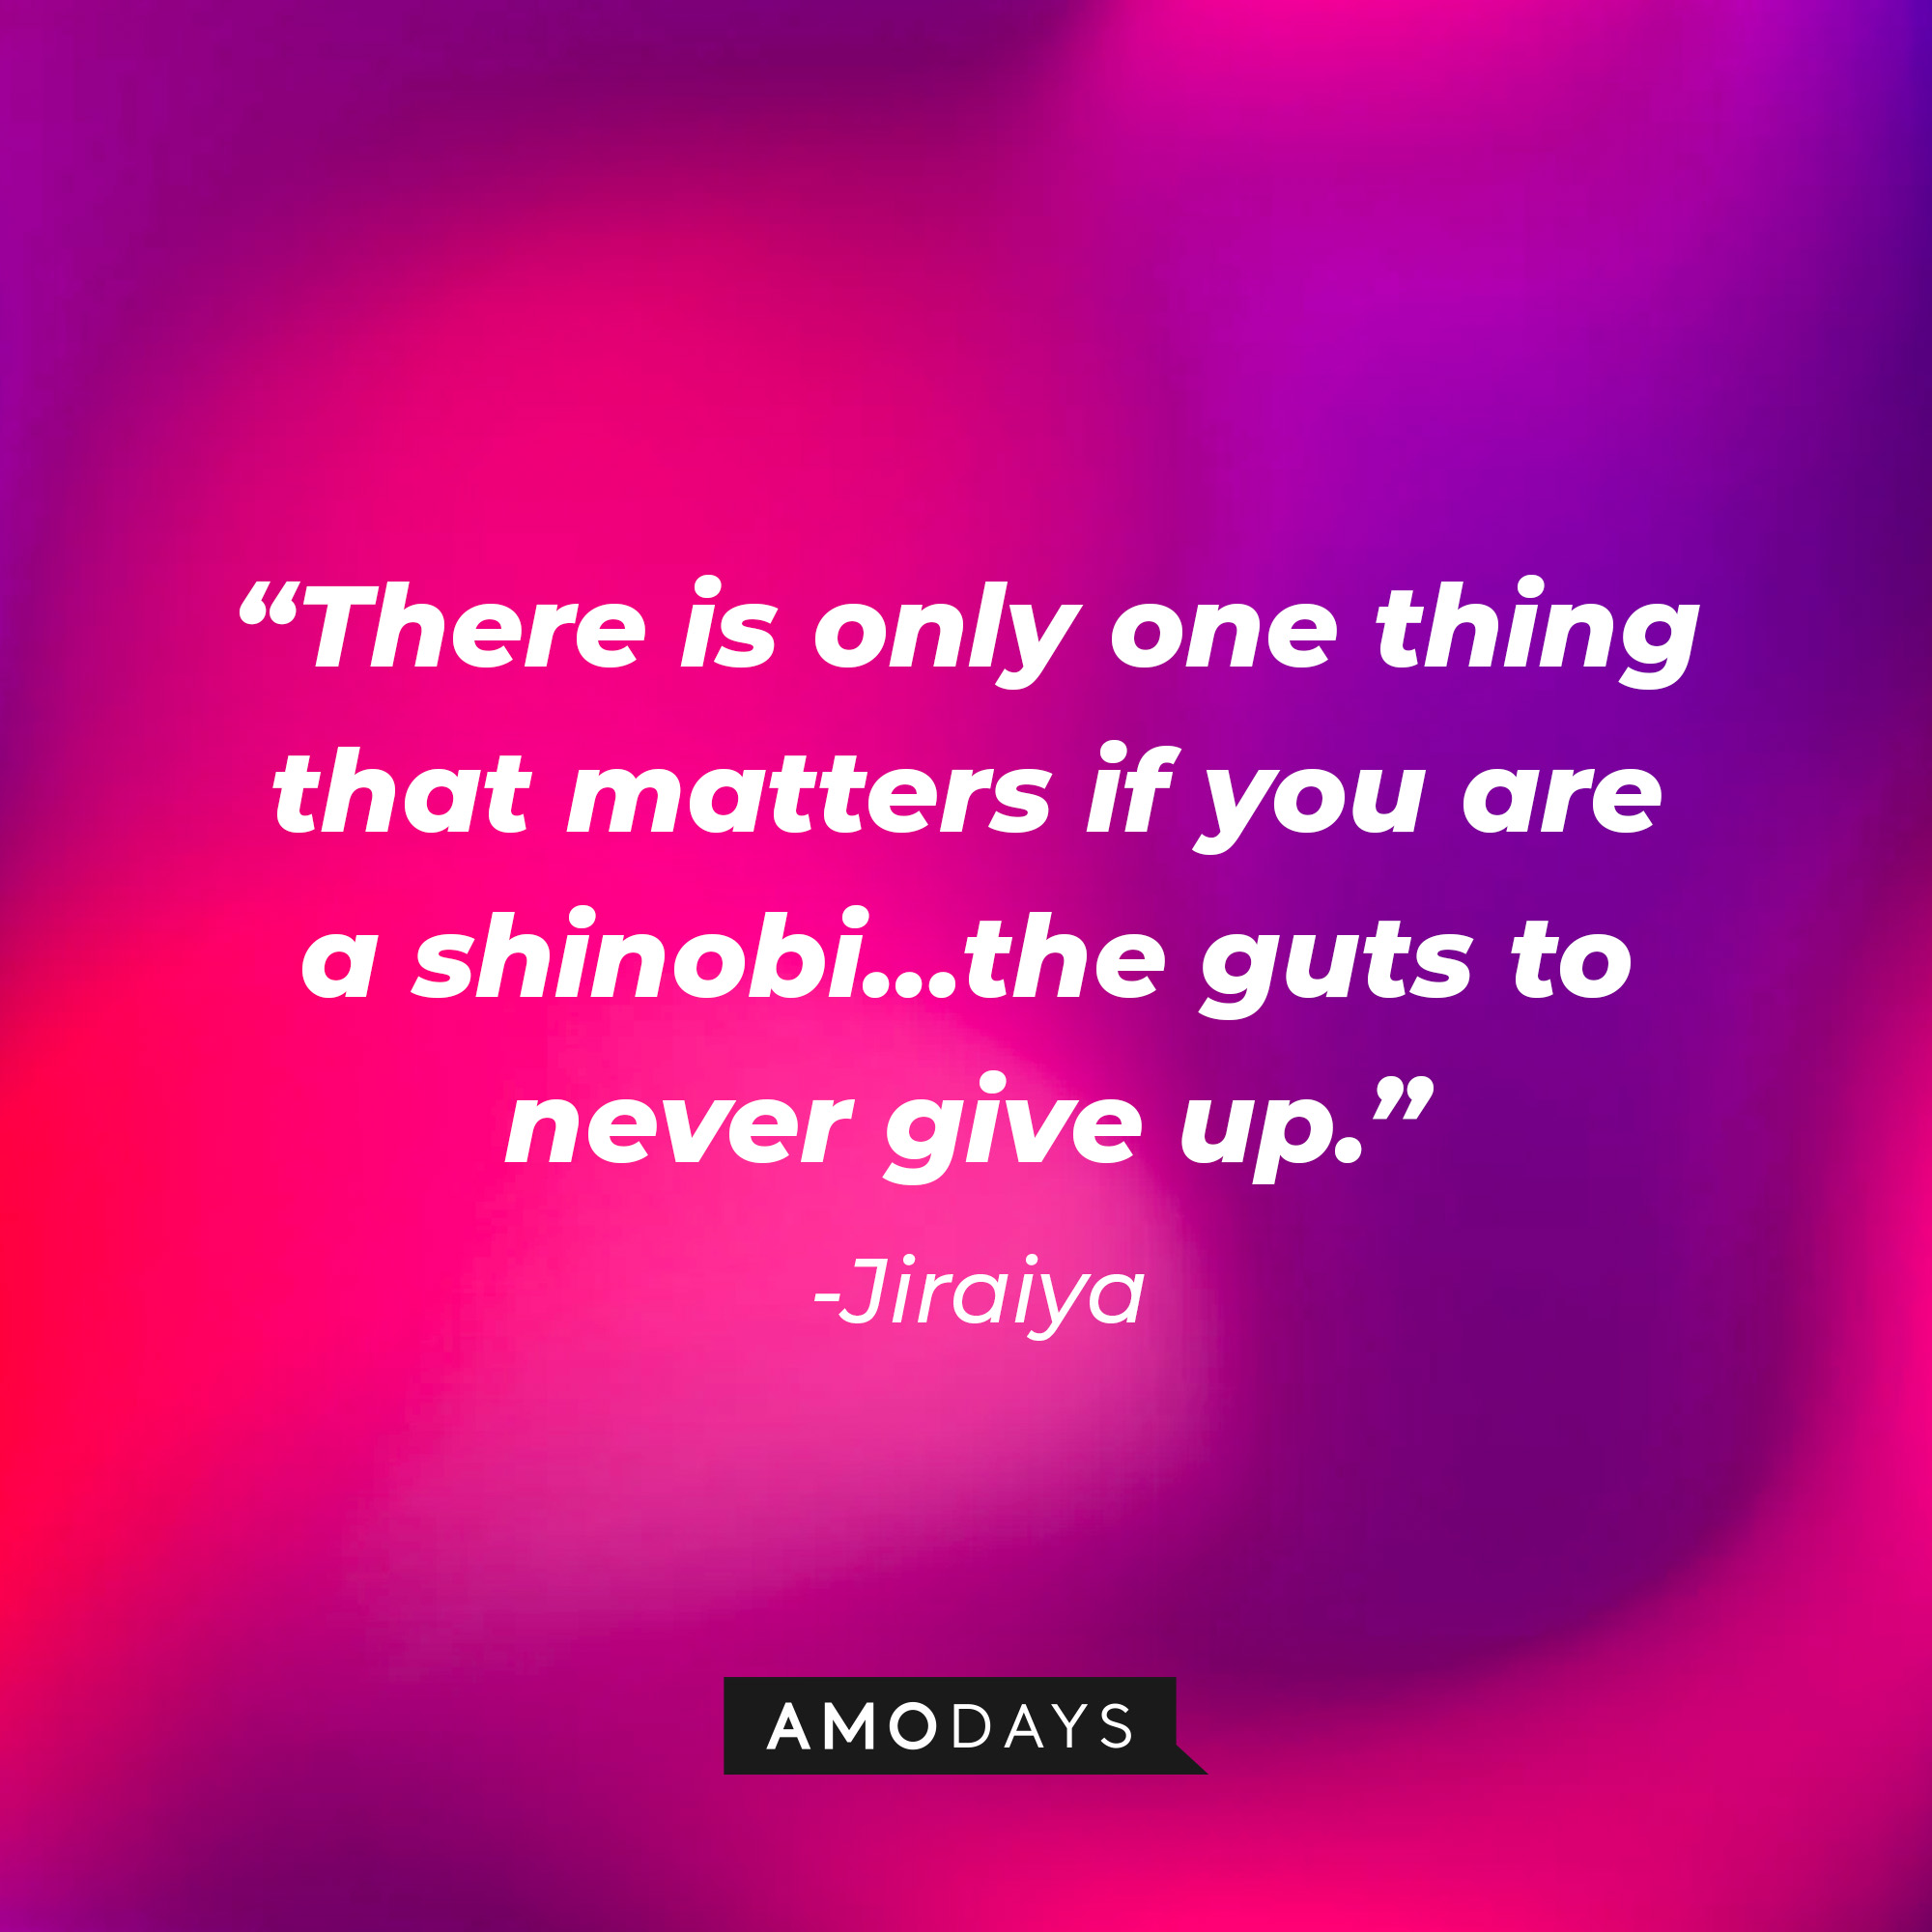 Jiraiya’s quote: “There is only one thing that matters if you are a shinobi…the guts to never give up."│ Source: AmoDays